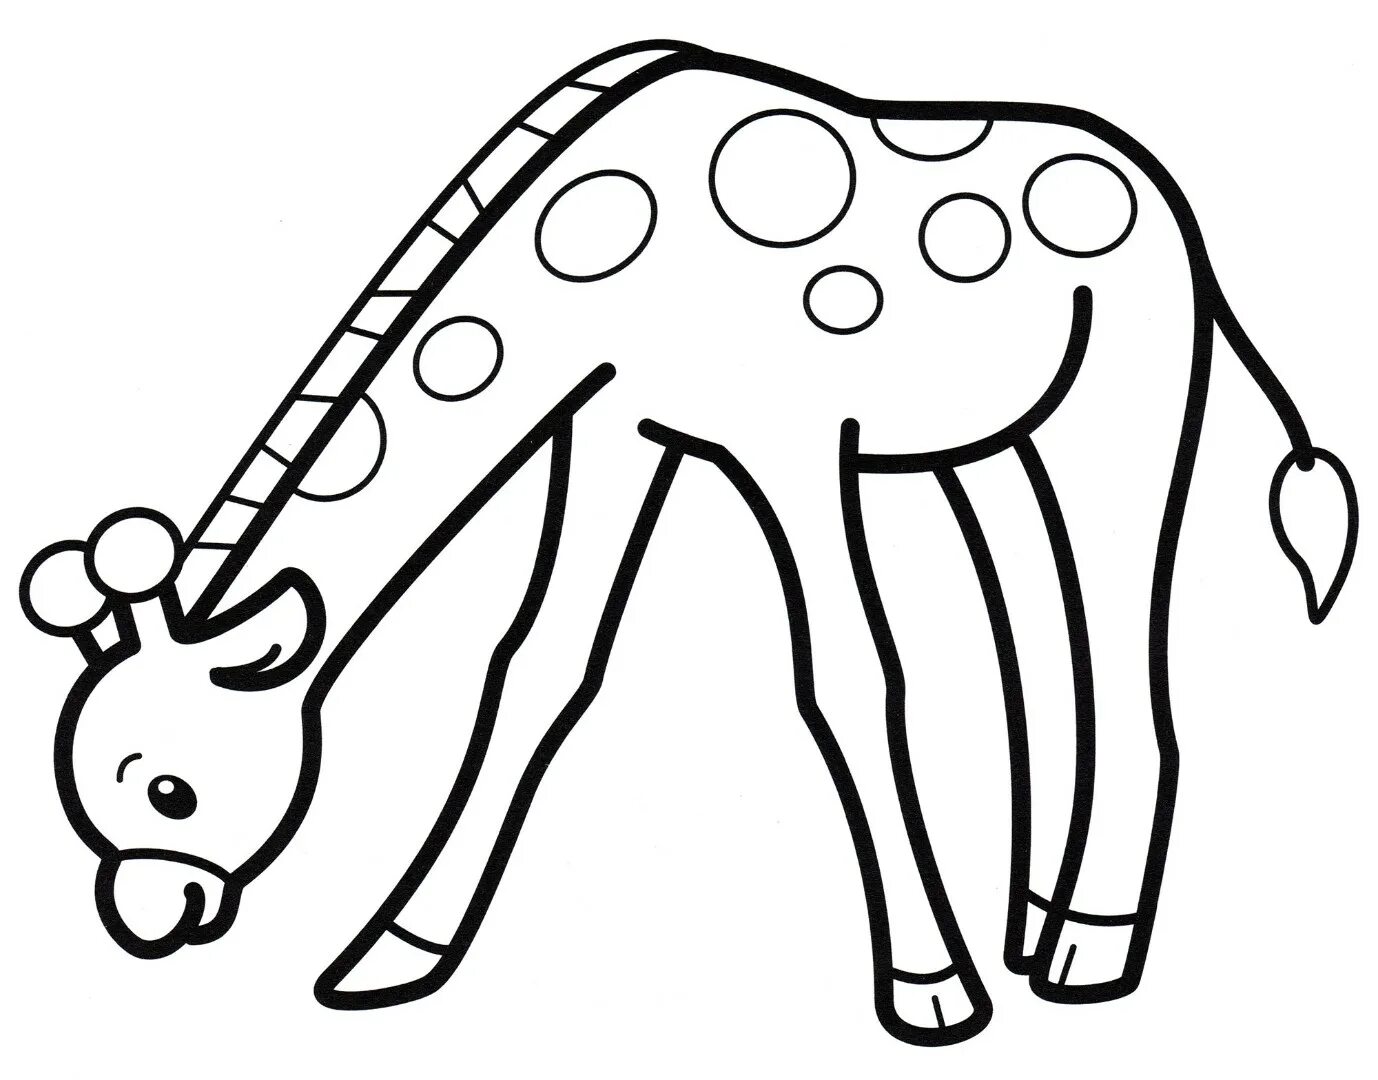 Outstanding giraffe coloring page for 6-7 year olds